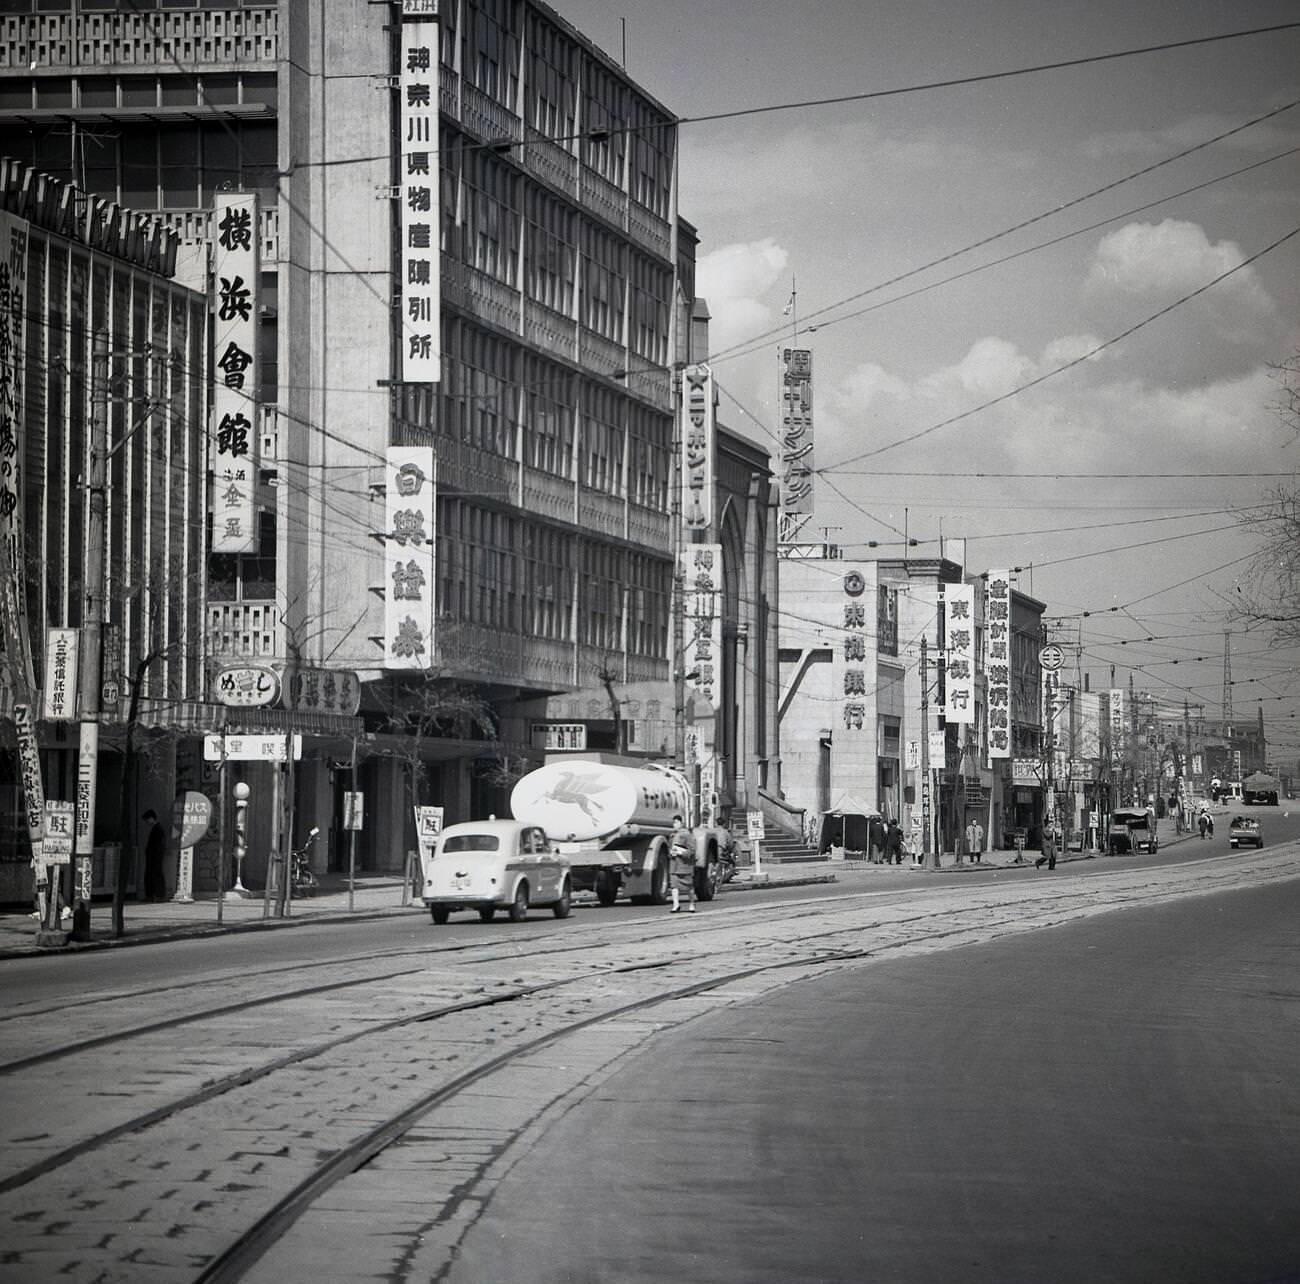 Tram-lines in the road in the old town area of Tokyo, 1950s.